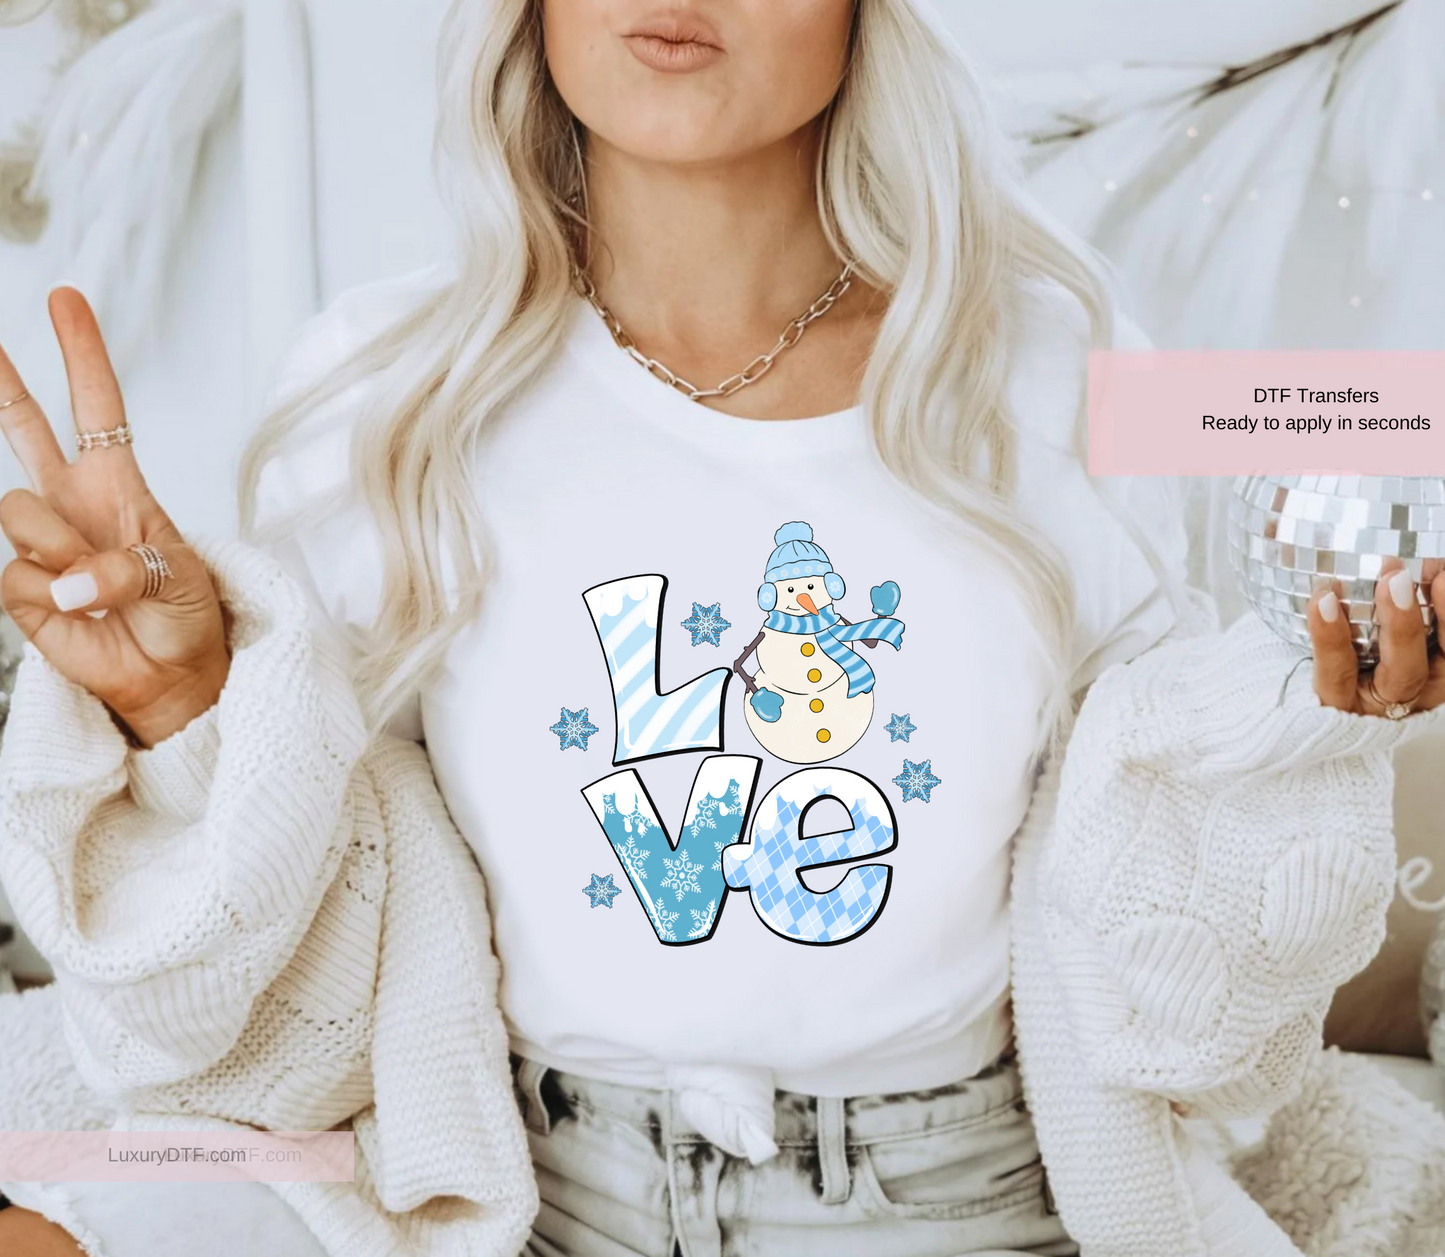 Winter Love Snowman DTF Transfer on a white shirt | easy to apply heat transfer | luxurydtf.com